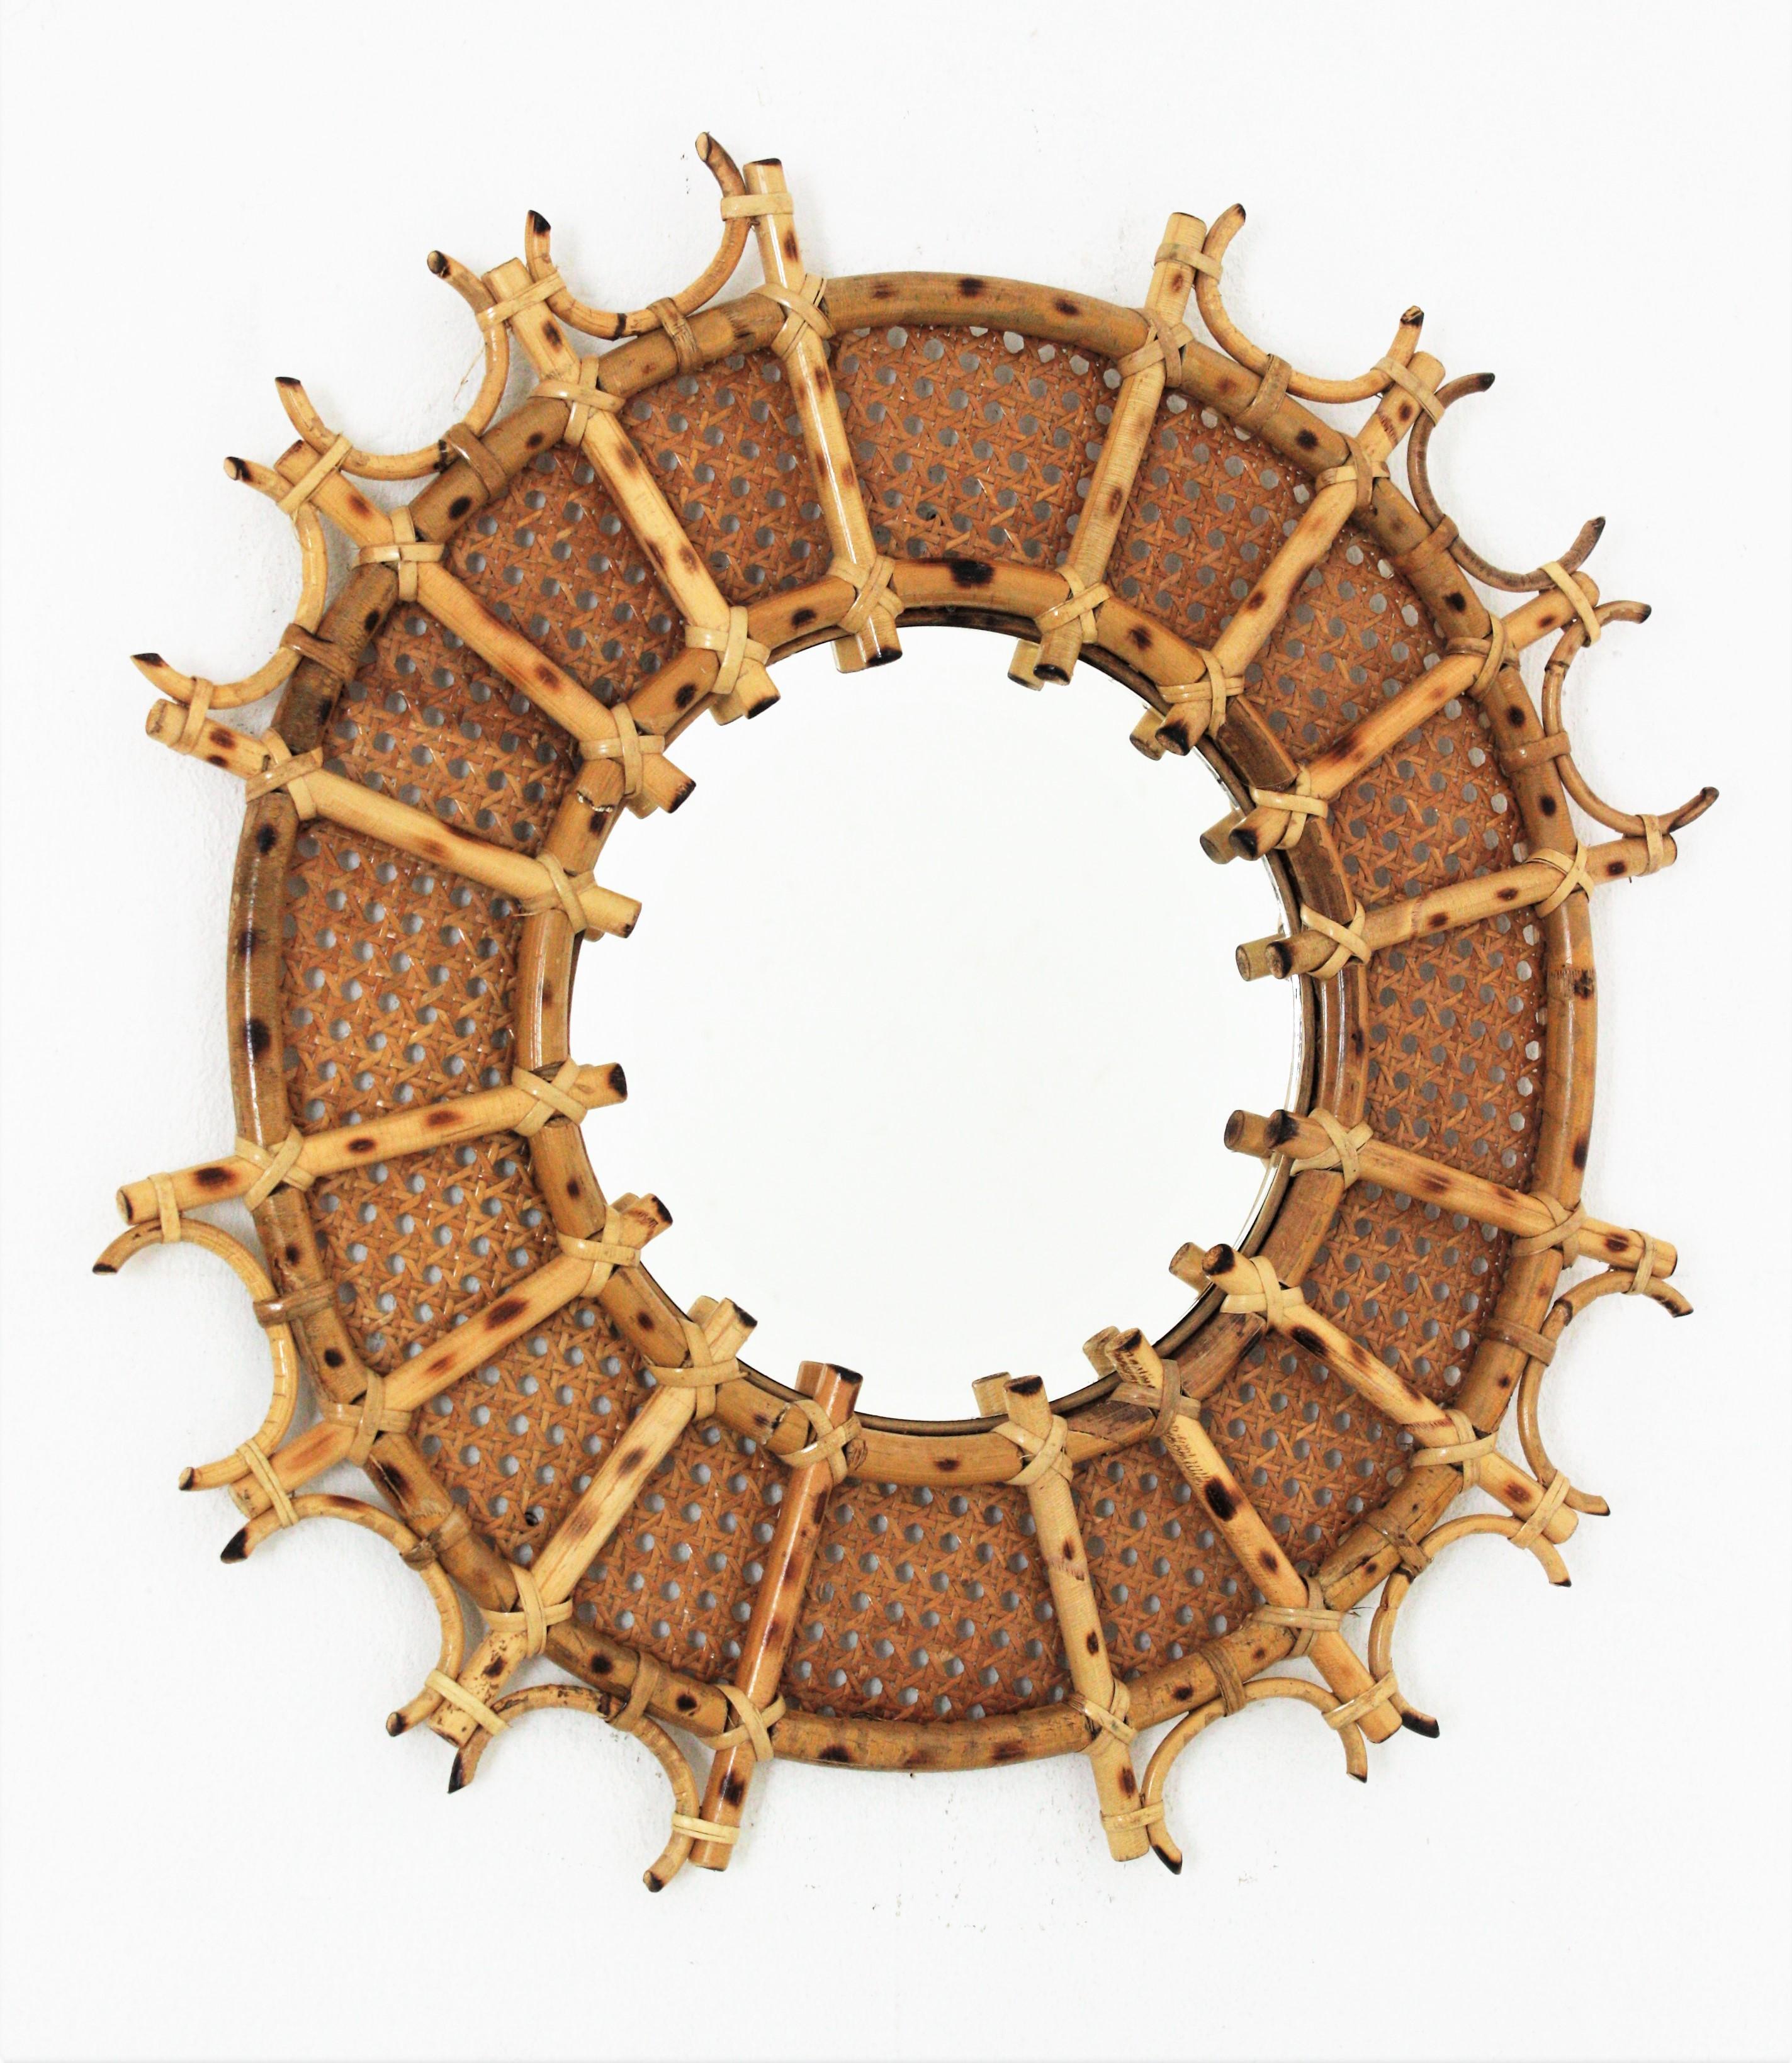 French Riviera Modernist handcrafted Rattan sunburst mirror. France, 1960s
Mediterranean style handcrafted sunburst rattan and wicker weave mirror. Unusual design.
This mirror has a highly decorative caning frame with rattan canes in sunburst